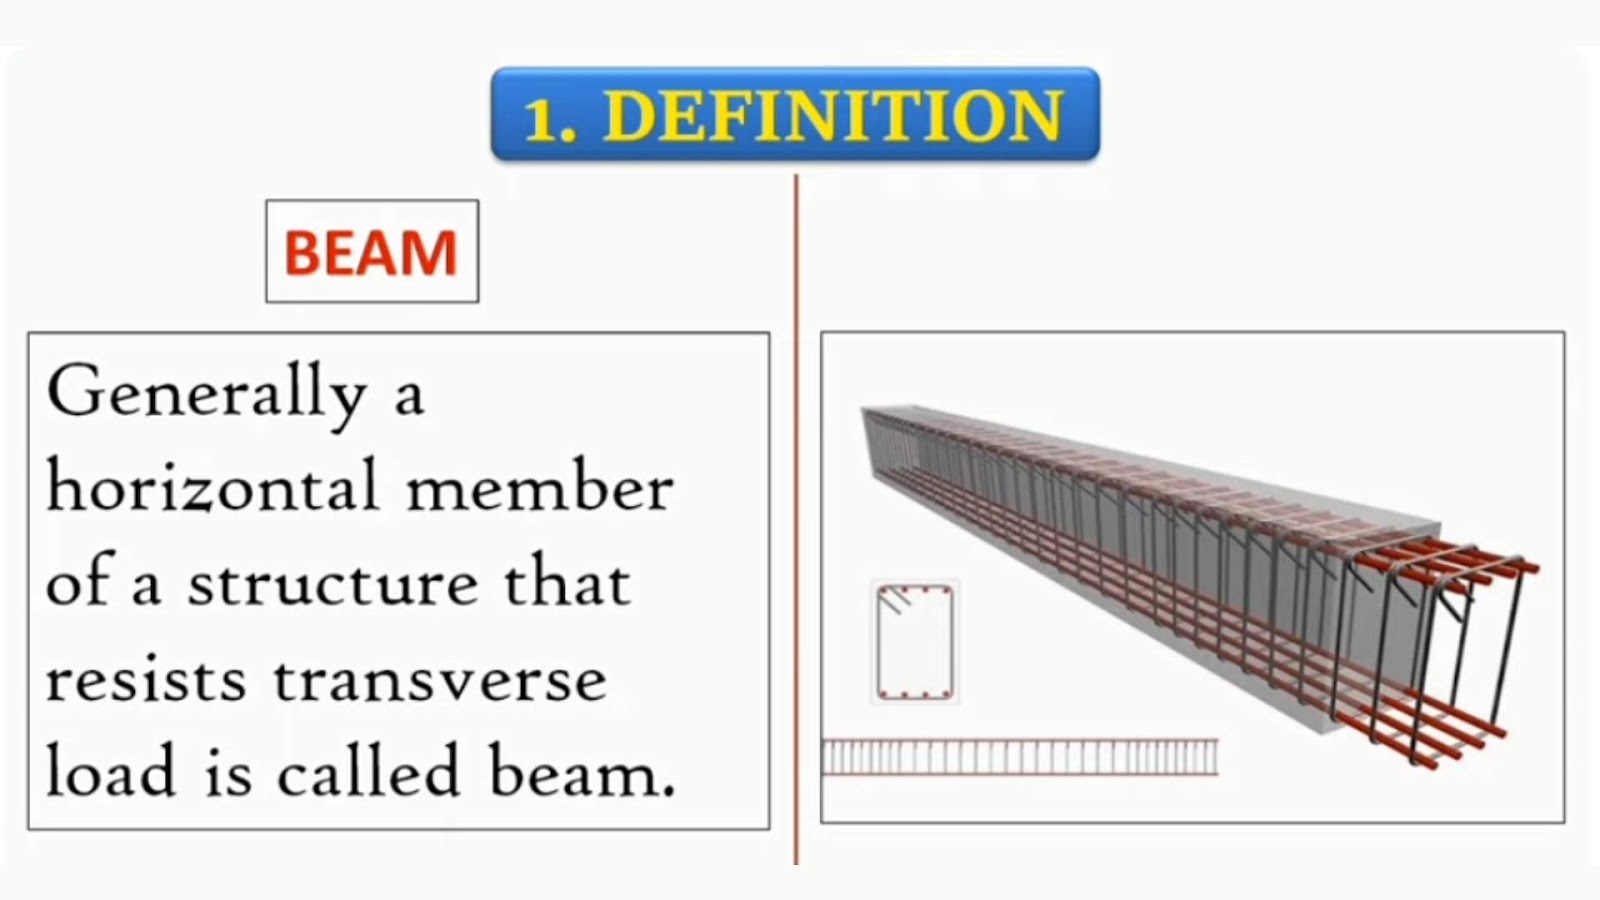 What is a beam?